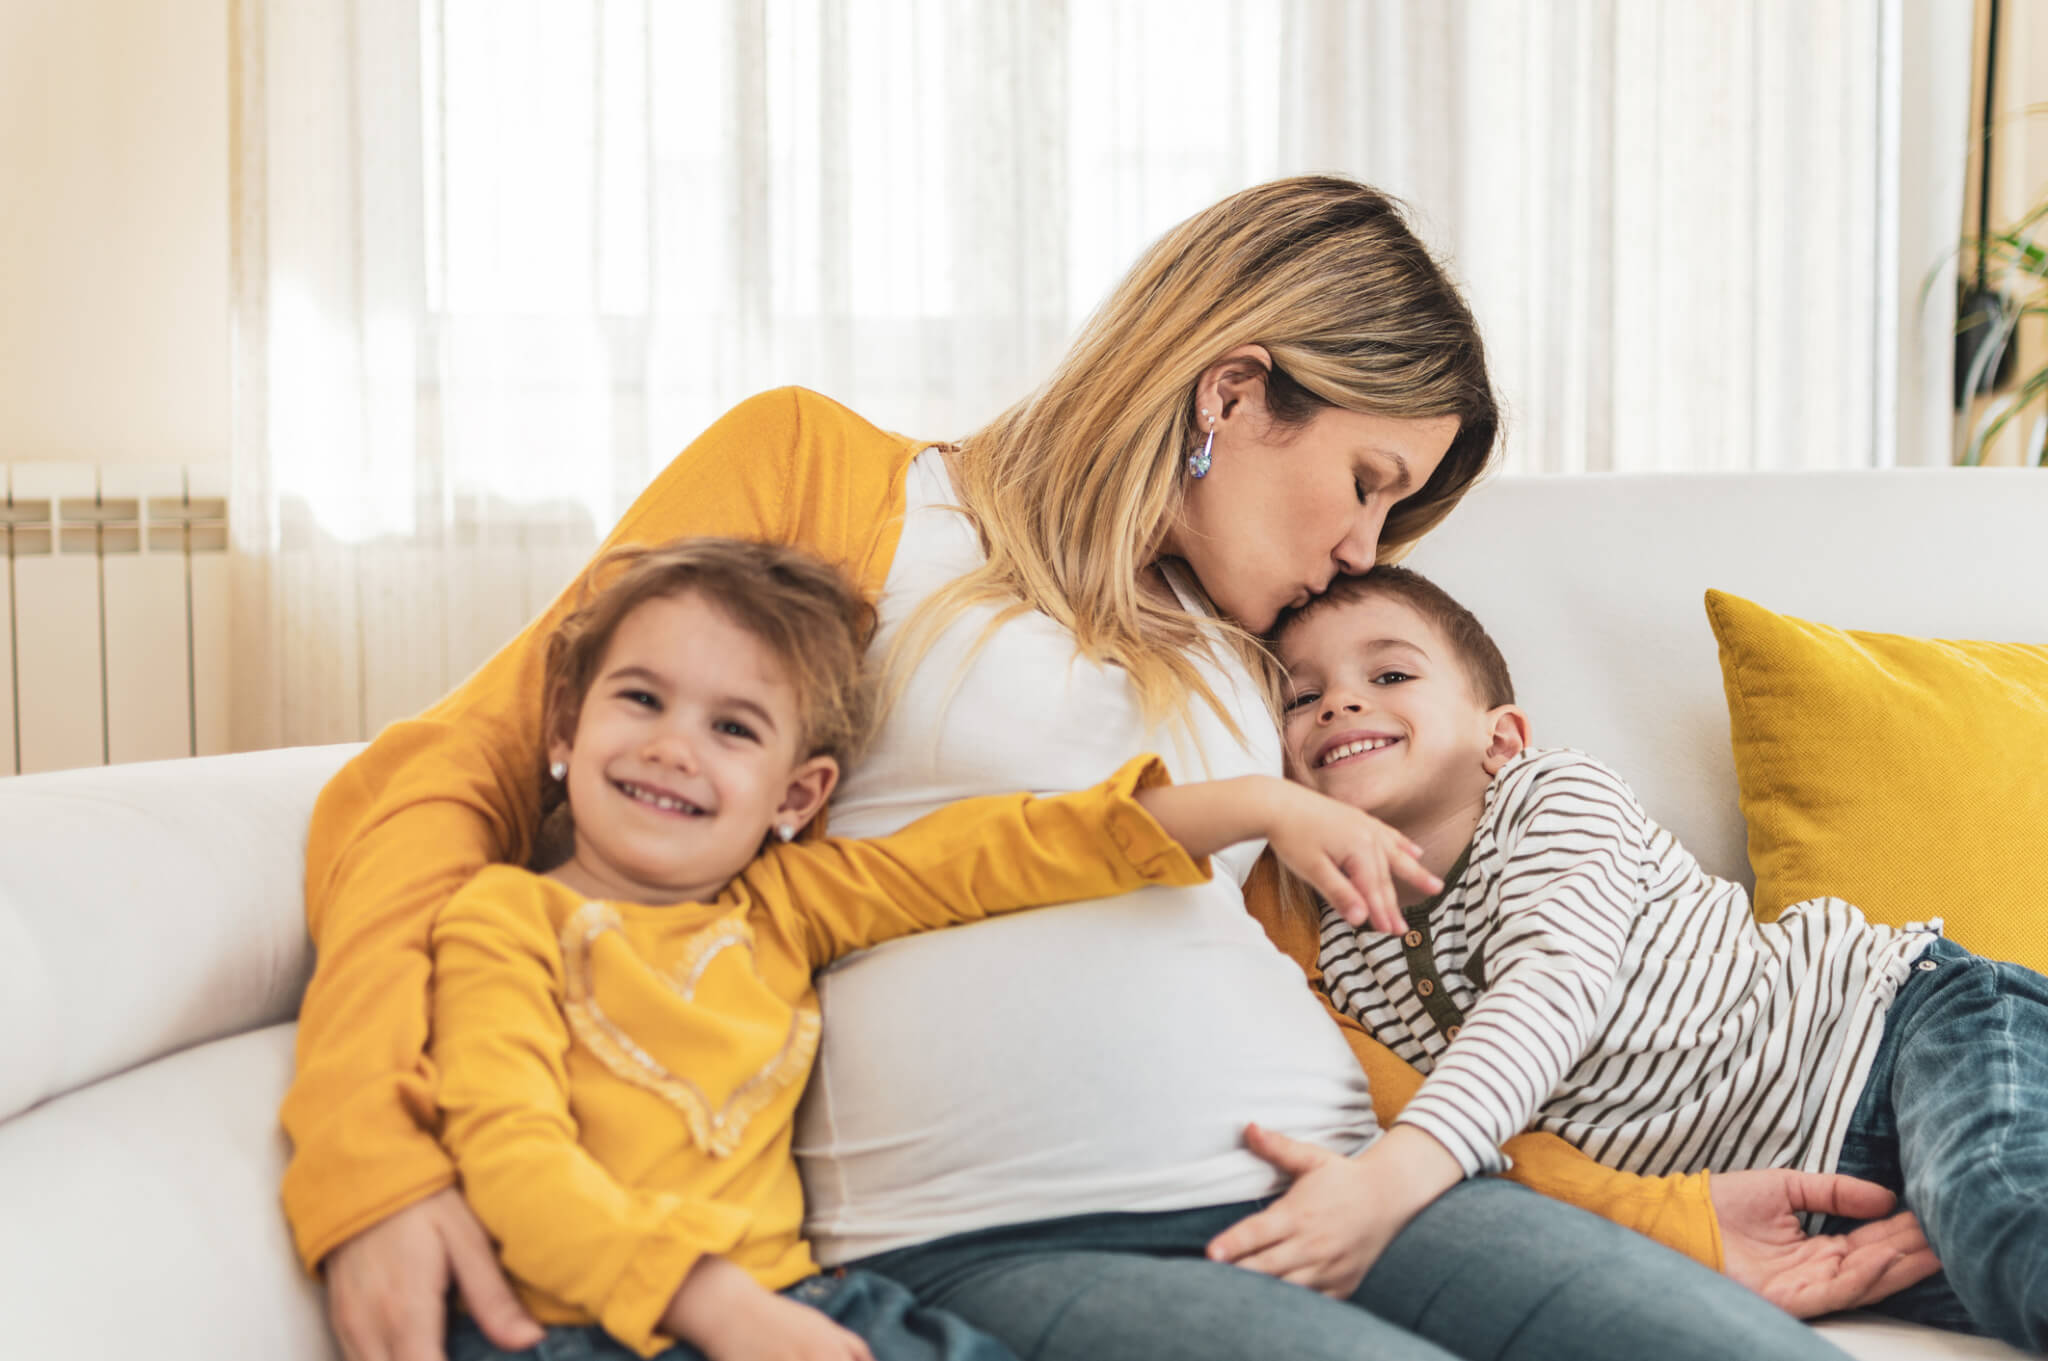 Happy mother and children,a boy and a girl are embracing pregnant belly with excitement on their faces.